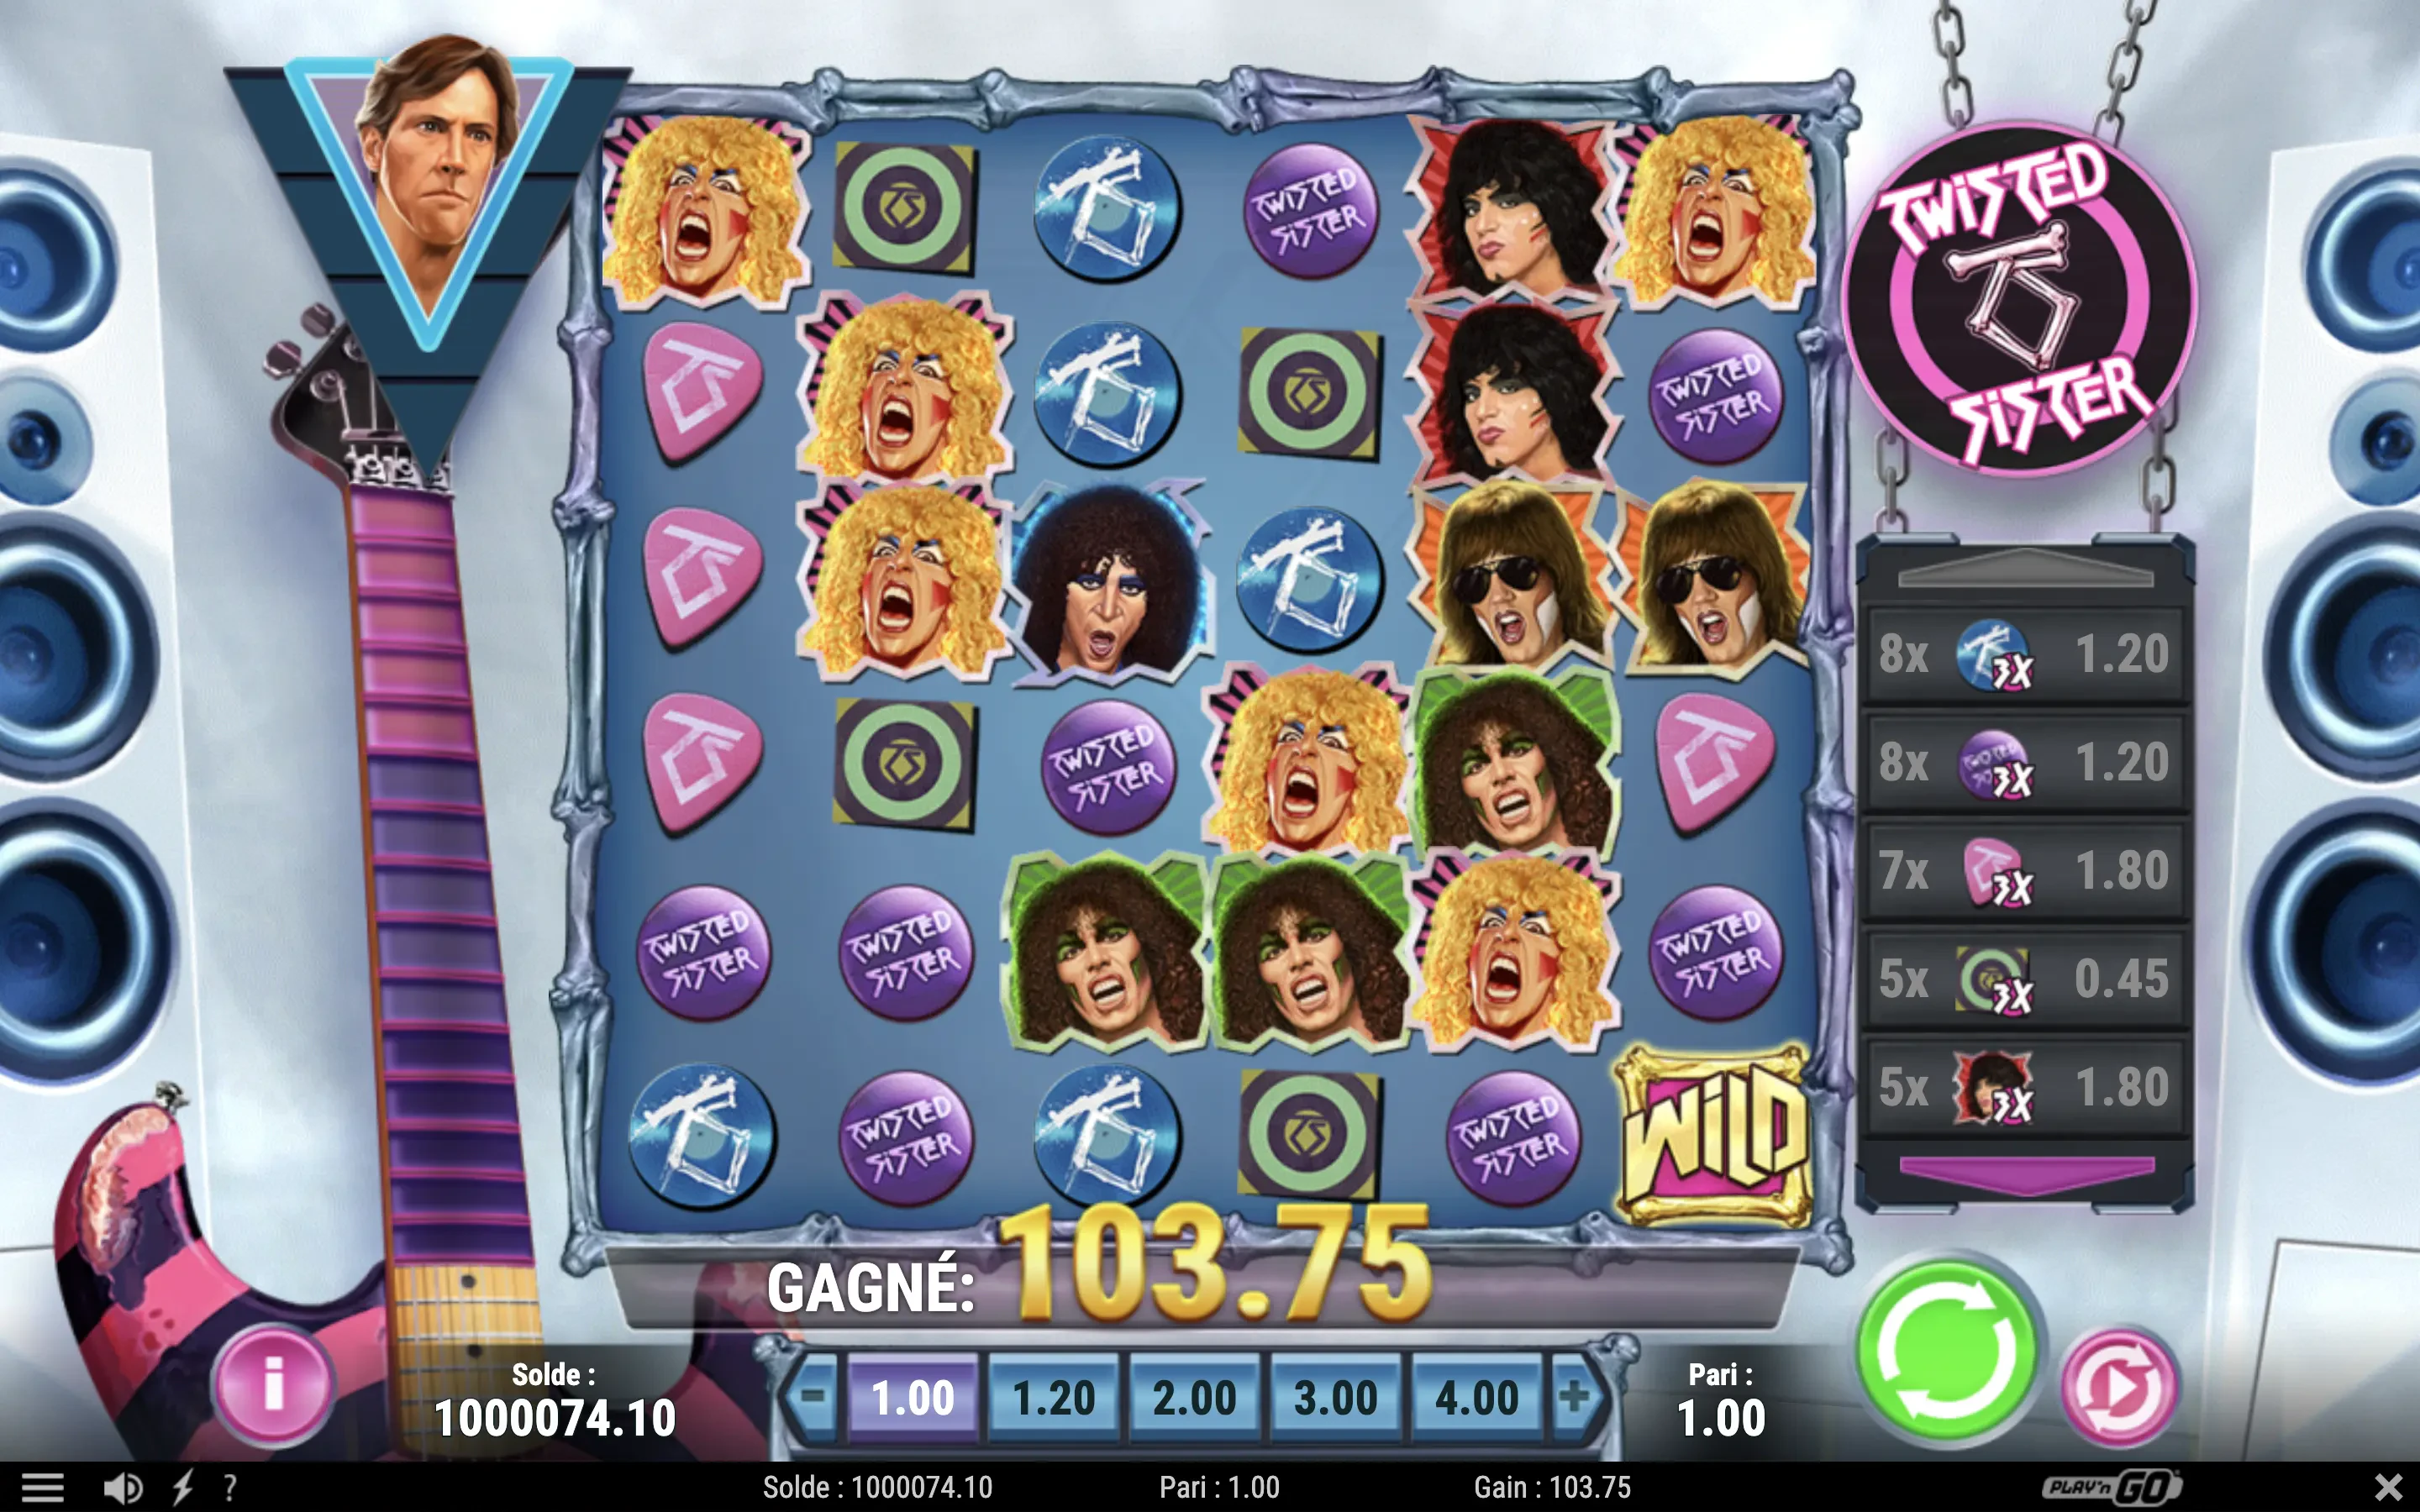 The Twisted Sister slot machine by Play'n GO